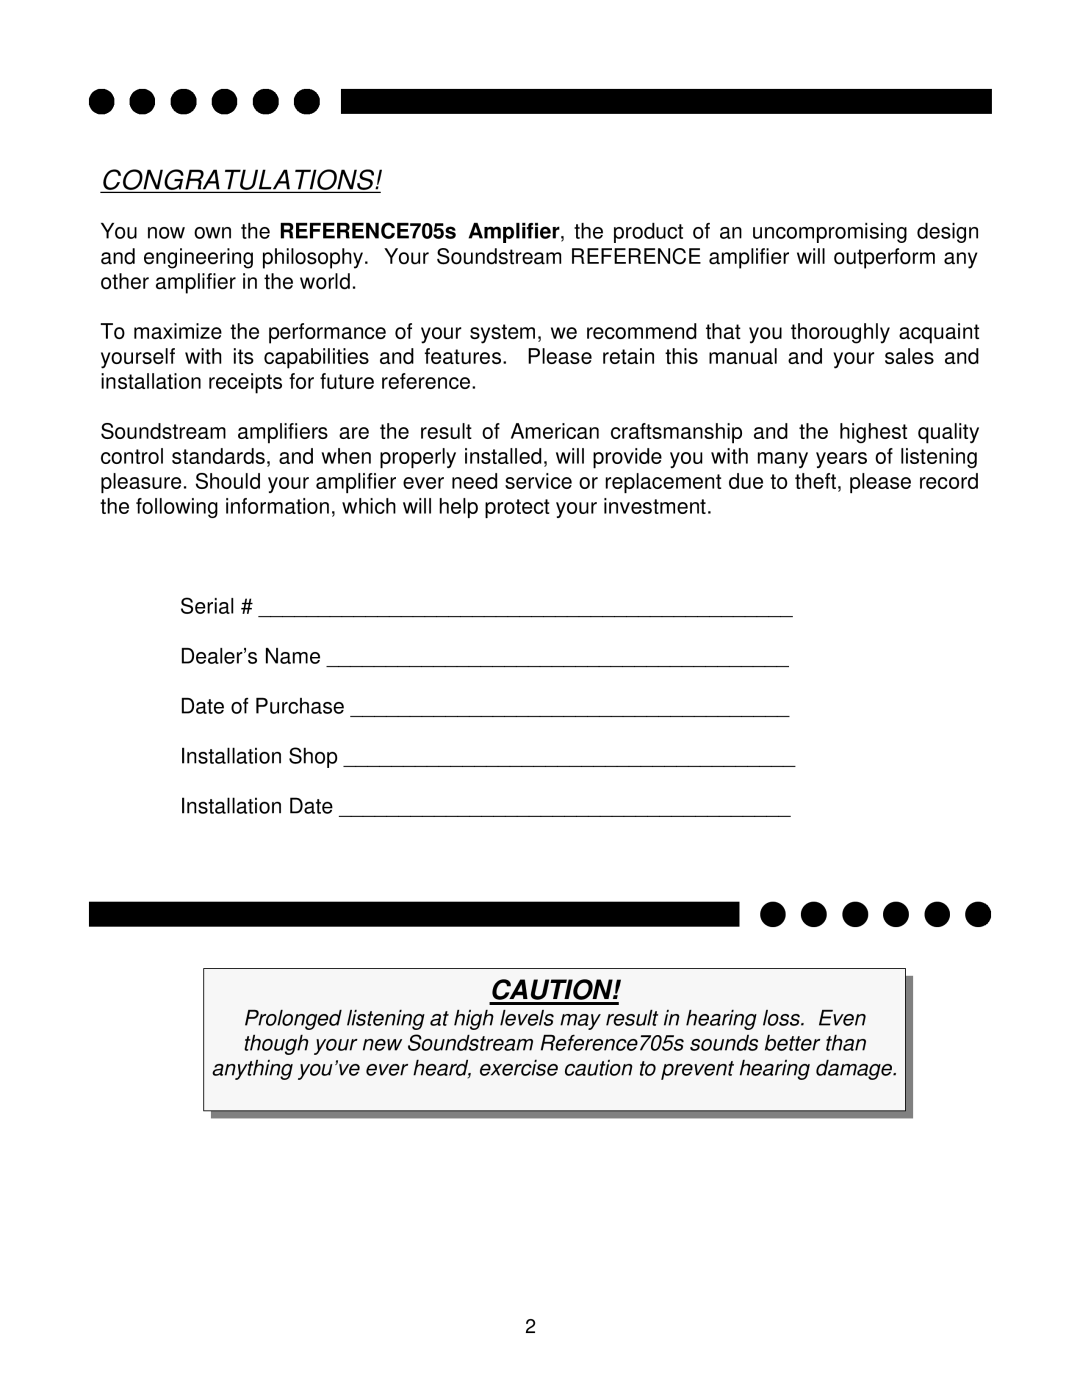 Soundstream Technologies 705s owner manual Congratulations 